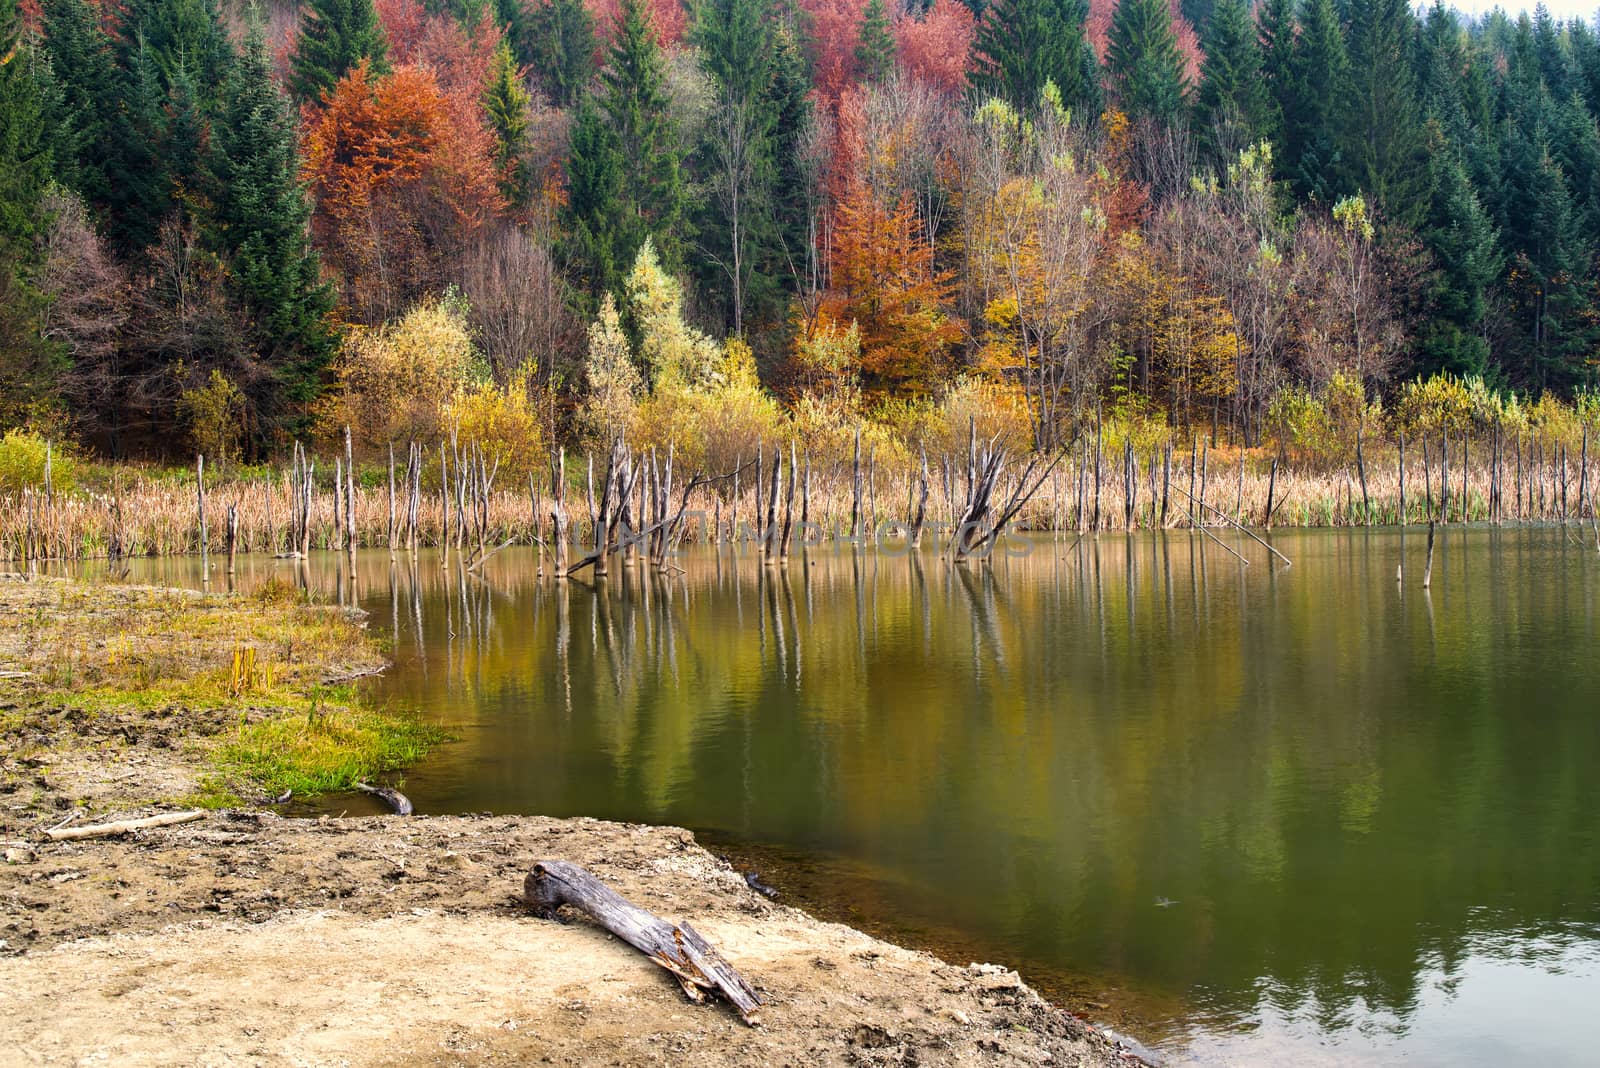 Dead tree trunks reflecting in lake water, autumn forest behind. Cuejdel lake was born 30 years ago (a landfall on river Cuejdel) in Romania, Today is the biggest natural dam lake in Europe.